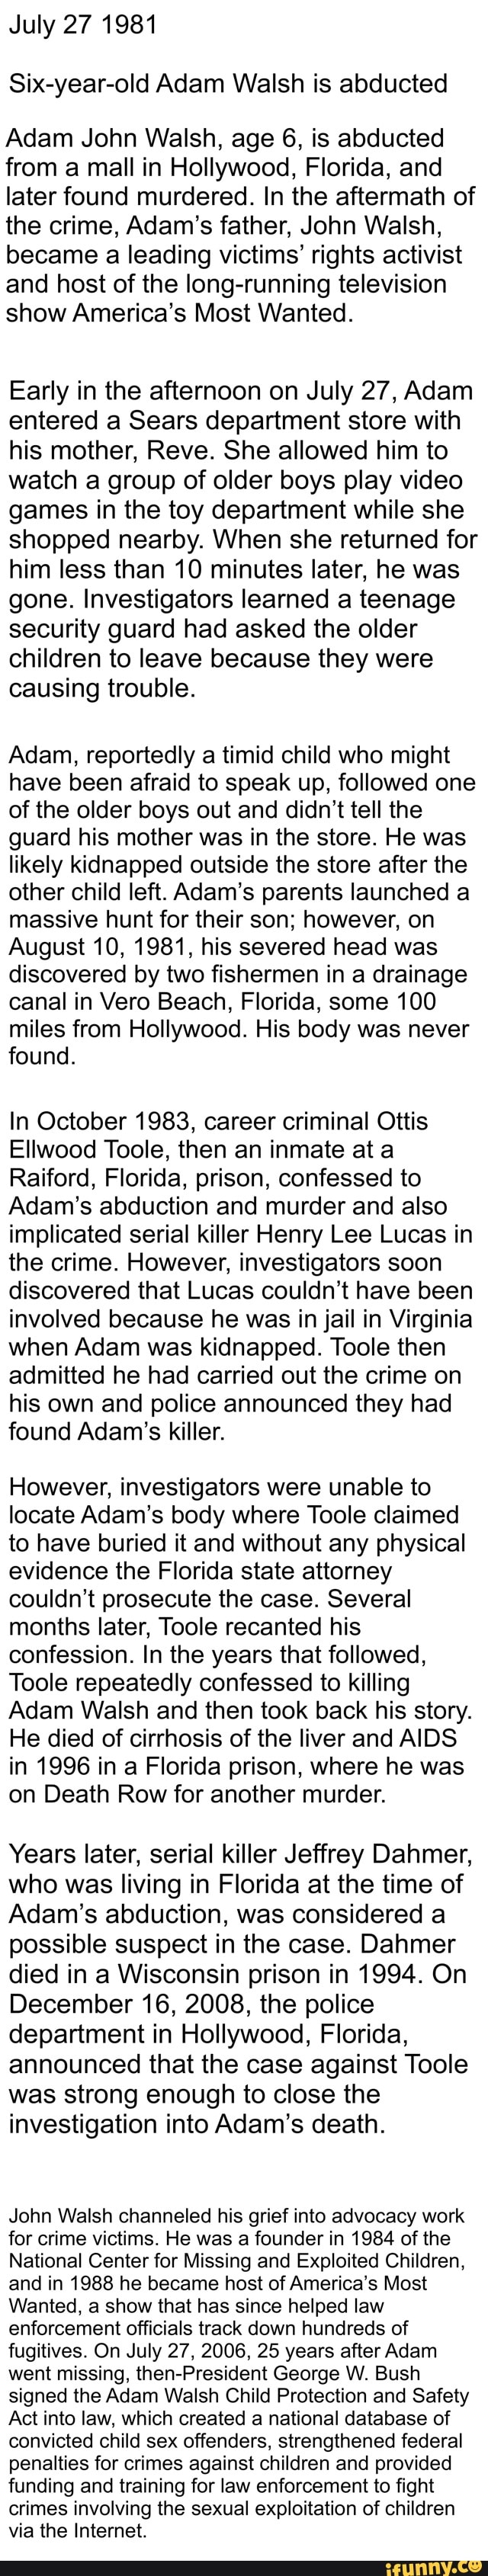 lets find them the kidnapping and murder of adam john walsh